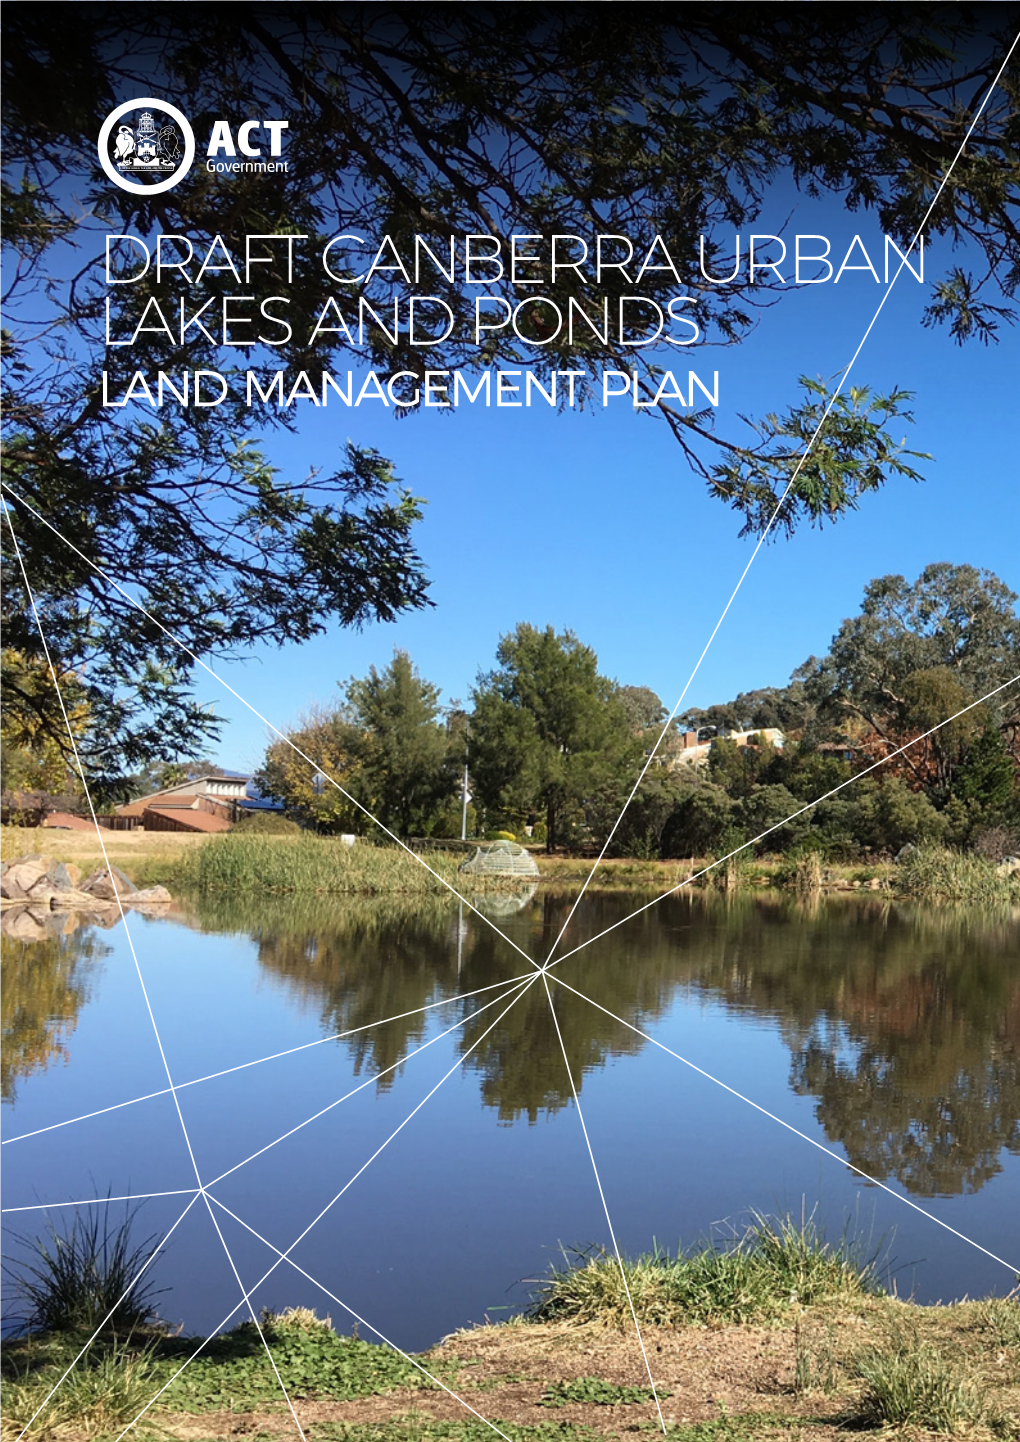 DRAFT CANBERRA URBAN LAKES and PONDS Land Management Plan